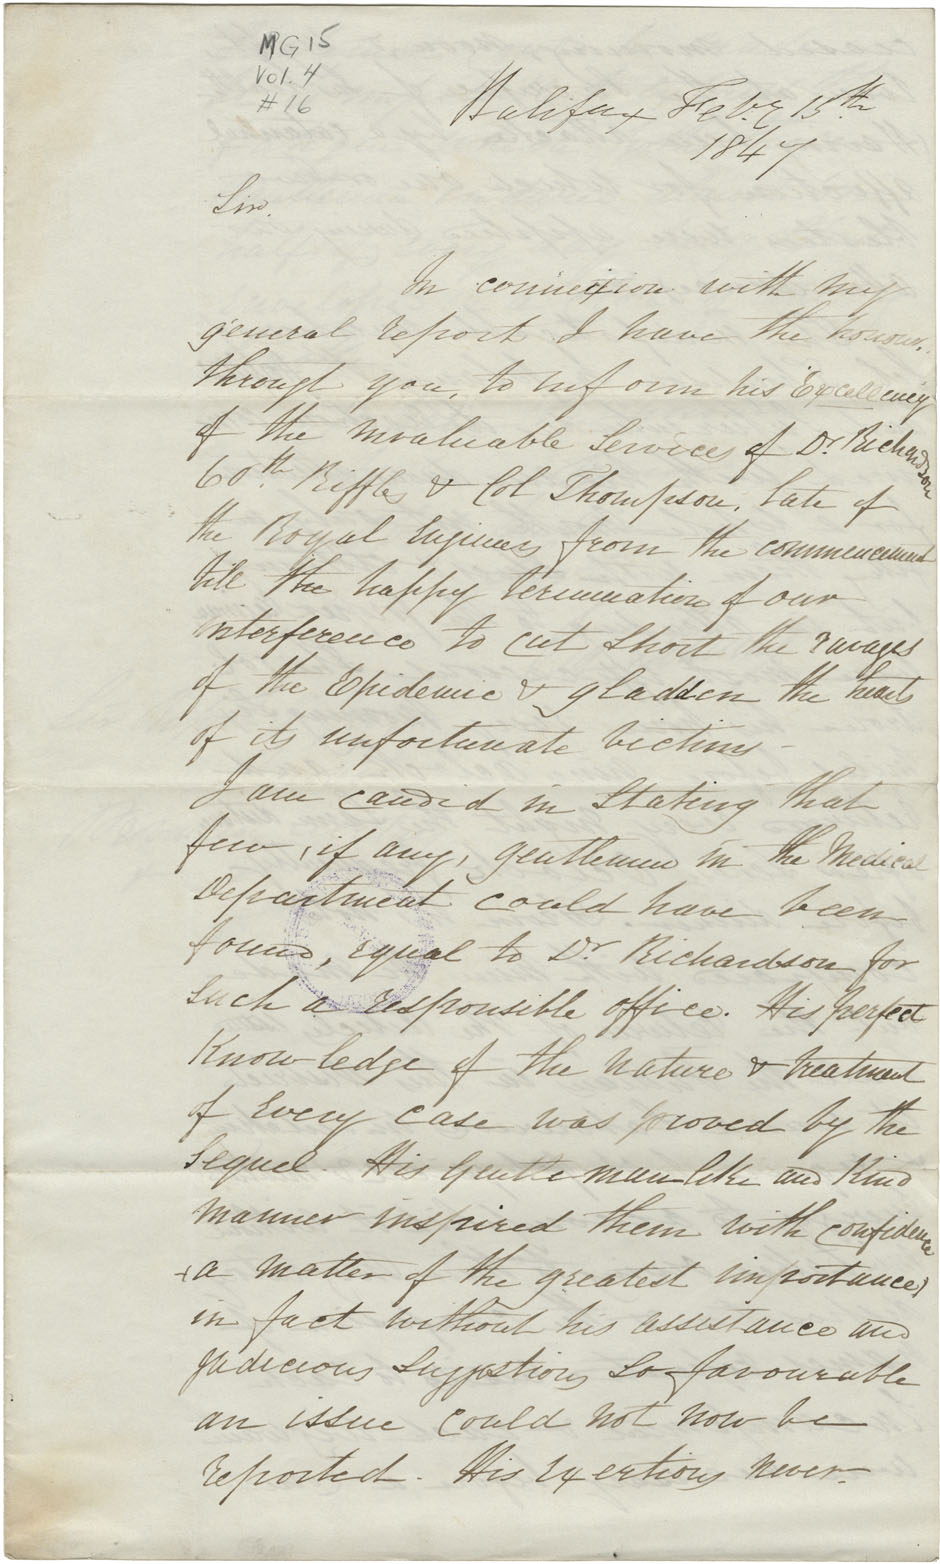 Report to Sir Rupert George concerning important services rendered by Dr. Richardson and Col. Thompson the the sick Mi'kmaq near Dartmouth.